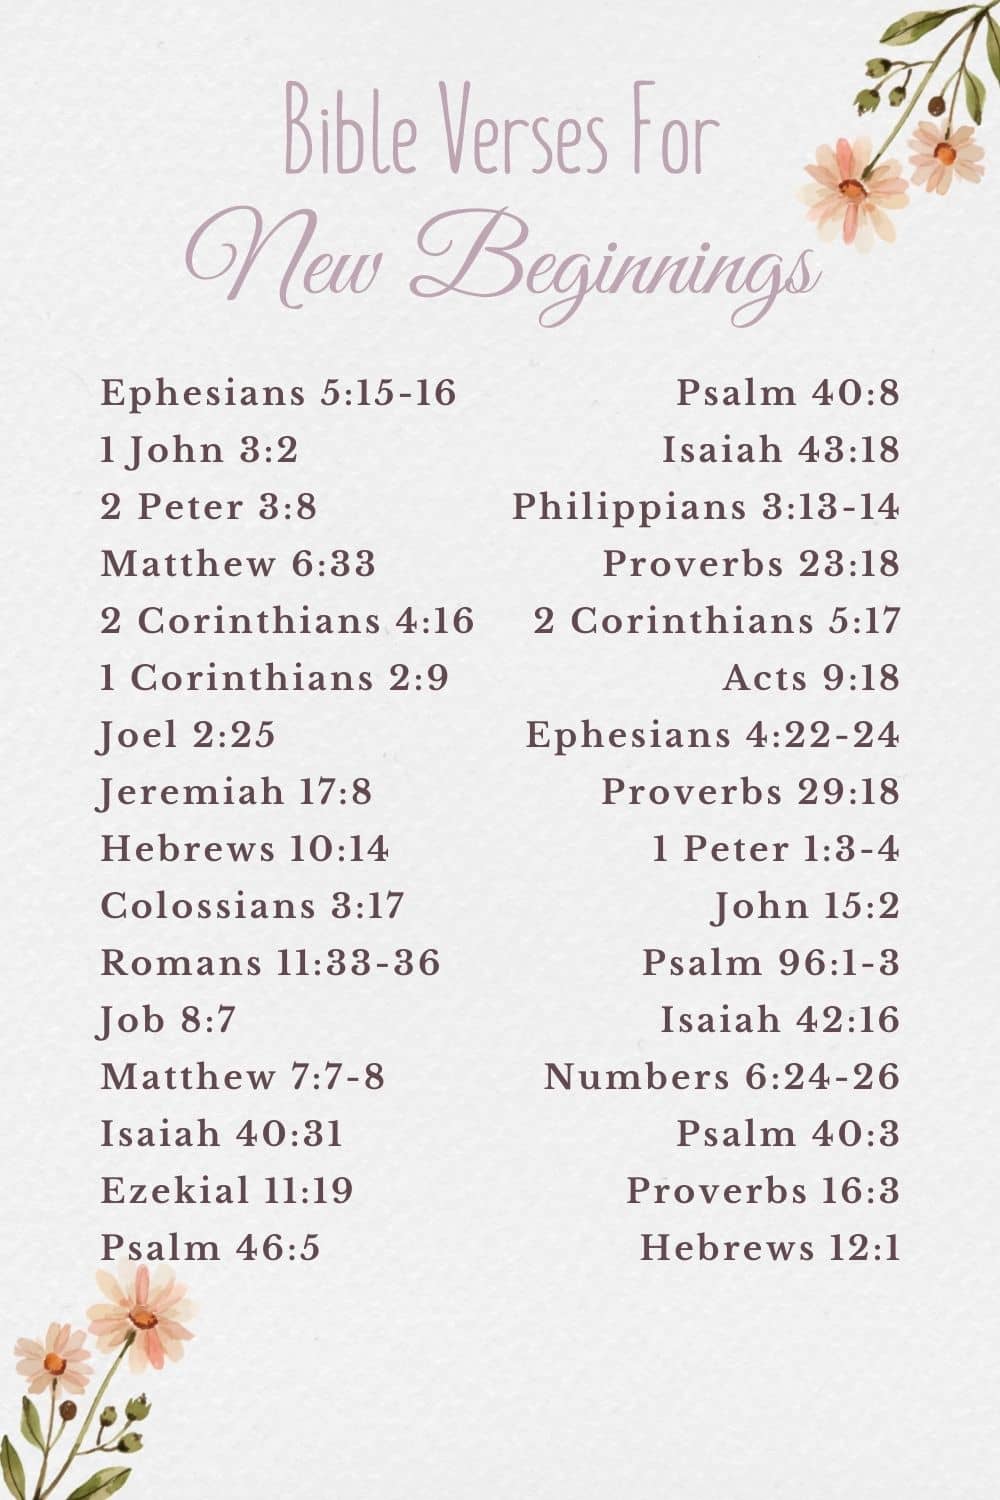 amazing bible verses about new beginnings, new beginnings scripture, bible verses about starting a new journey